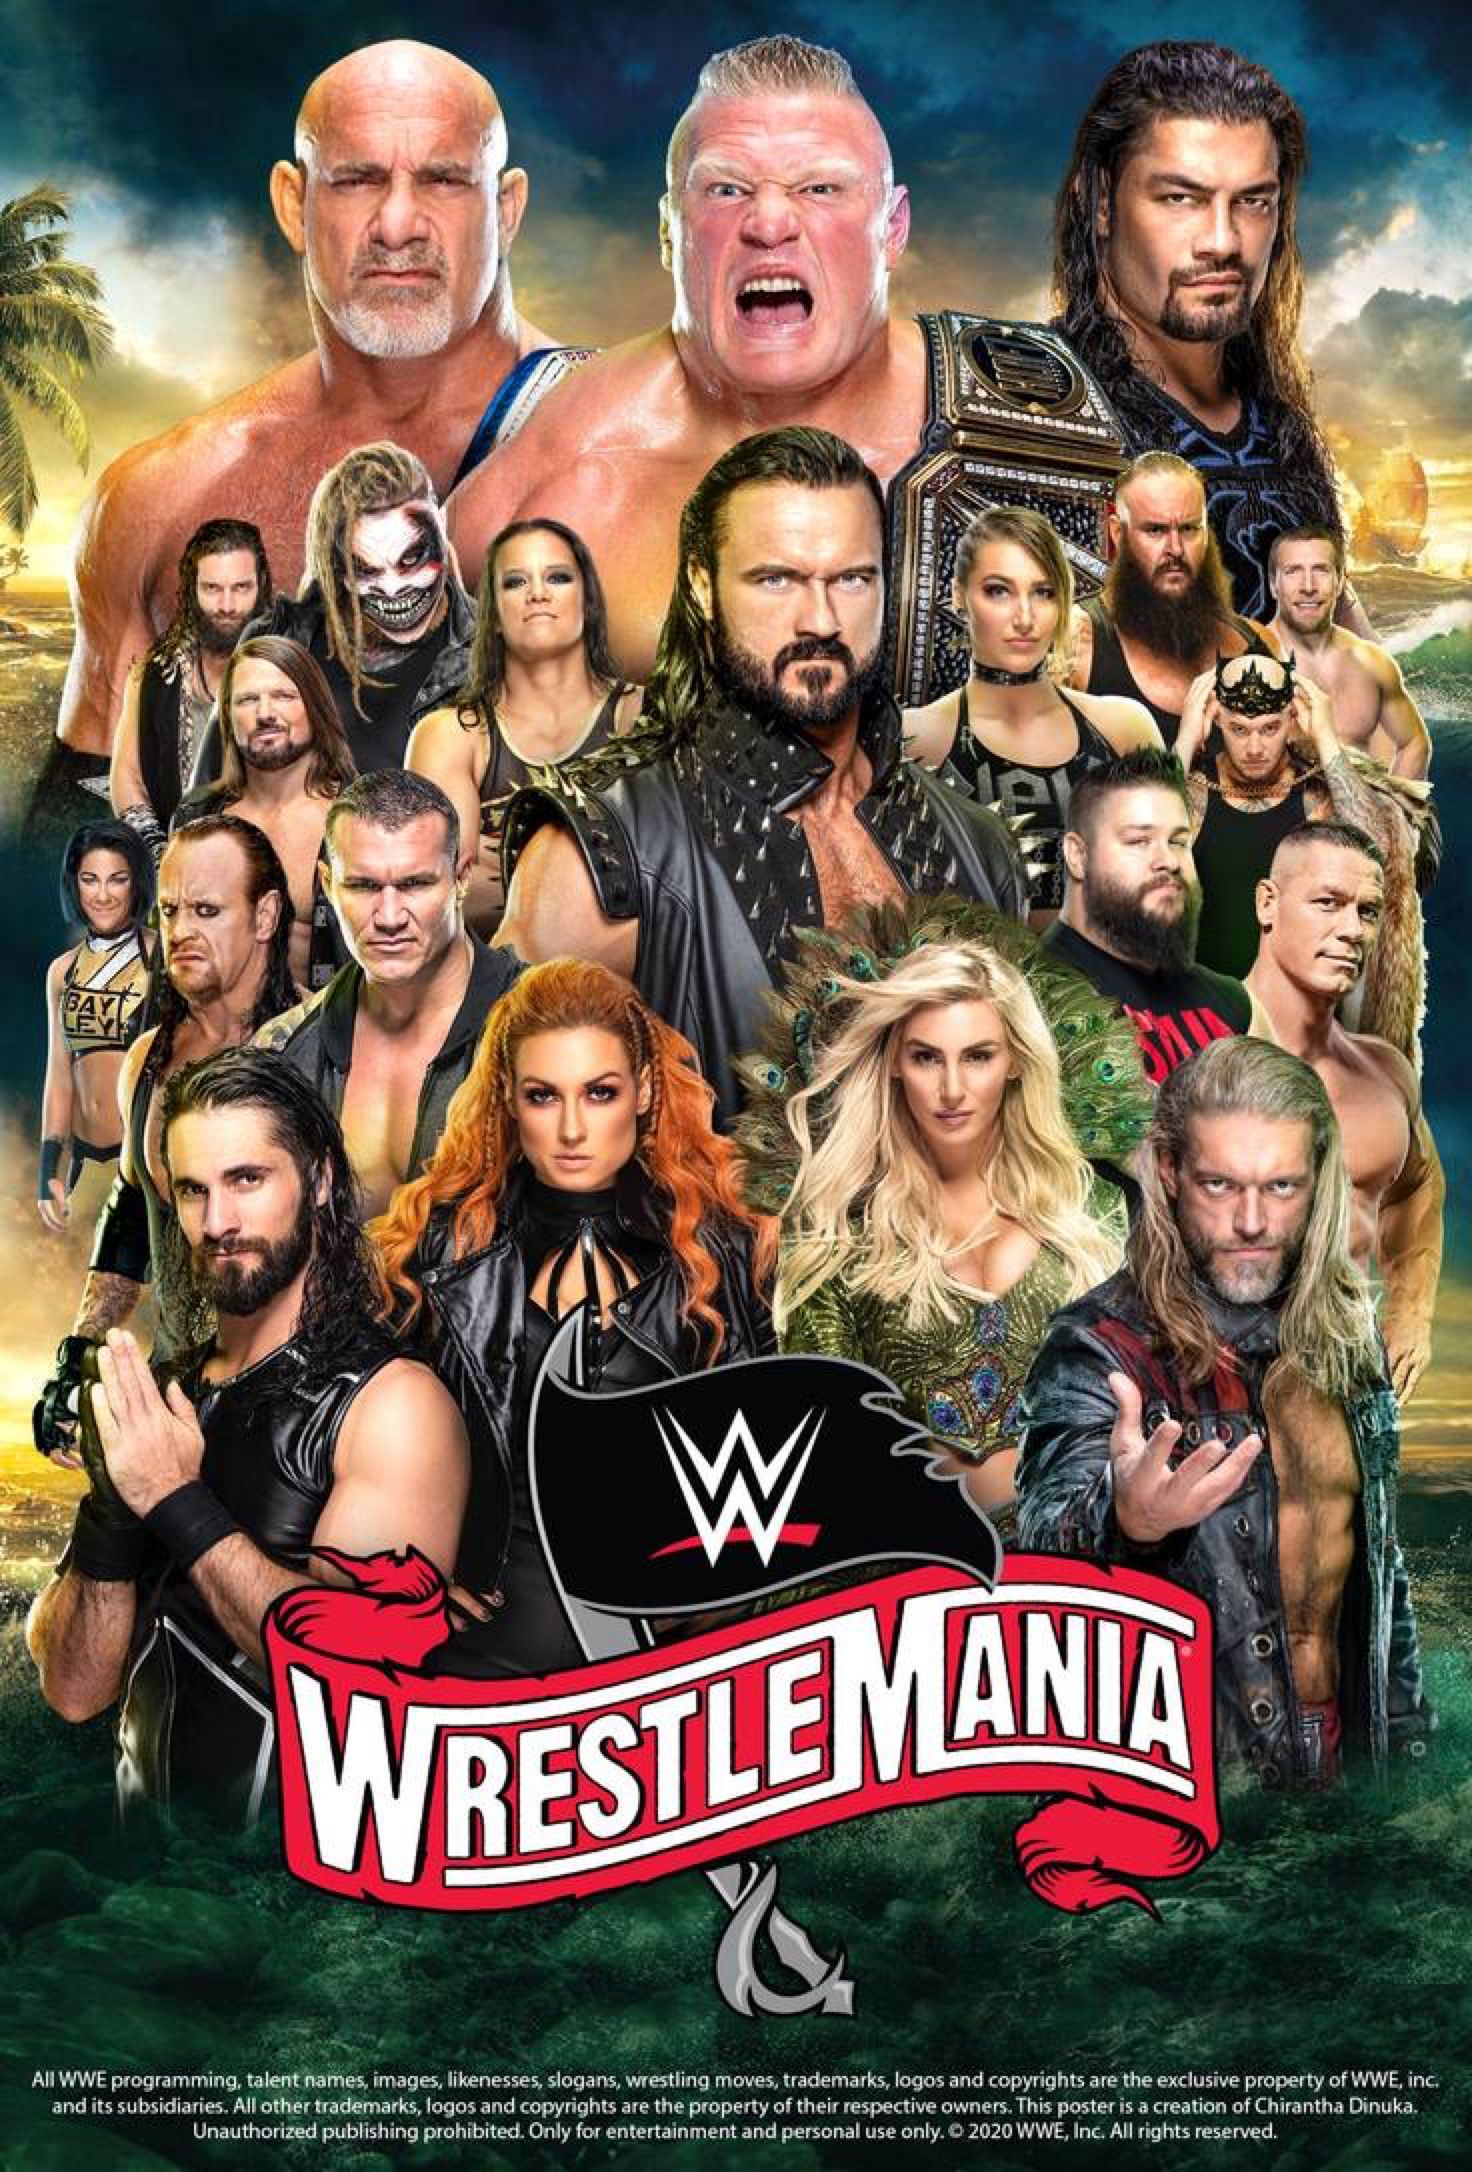 WWE Moves WrestleMania 37 to Tampa Bay, Sets Dallas and LA for 38, 39